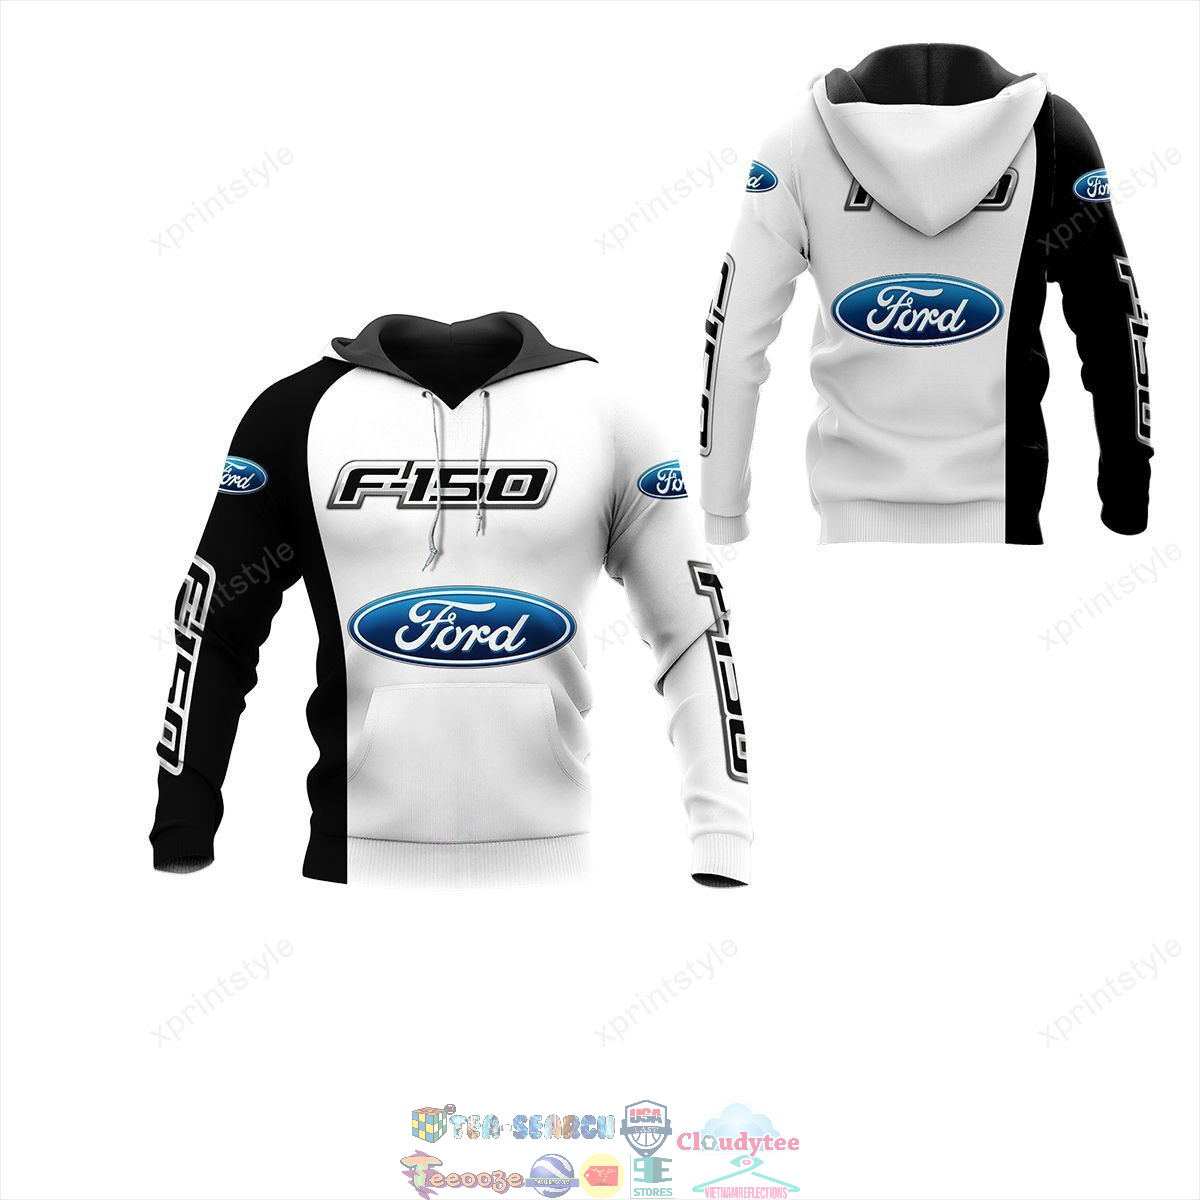 Ford F150 ver 10 hoodie and t-shirt – Saleoff